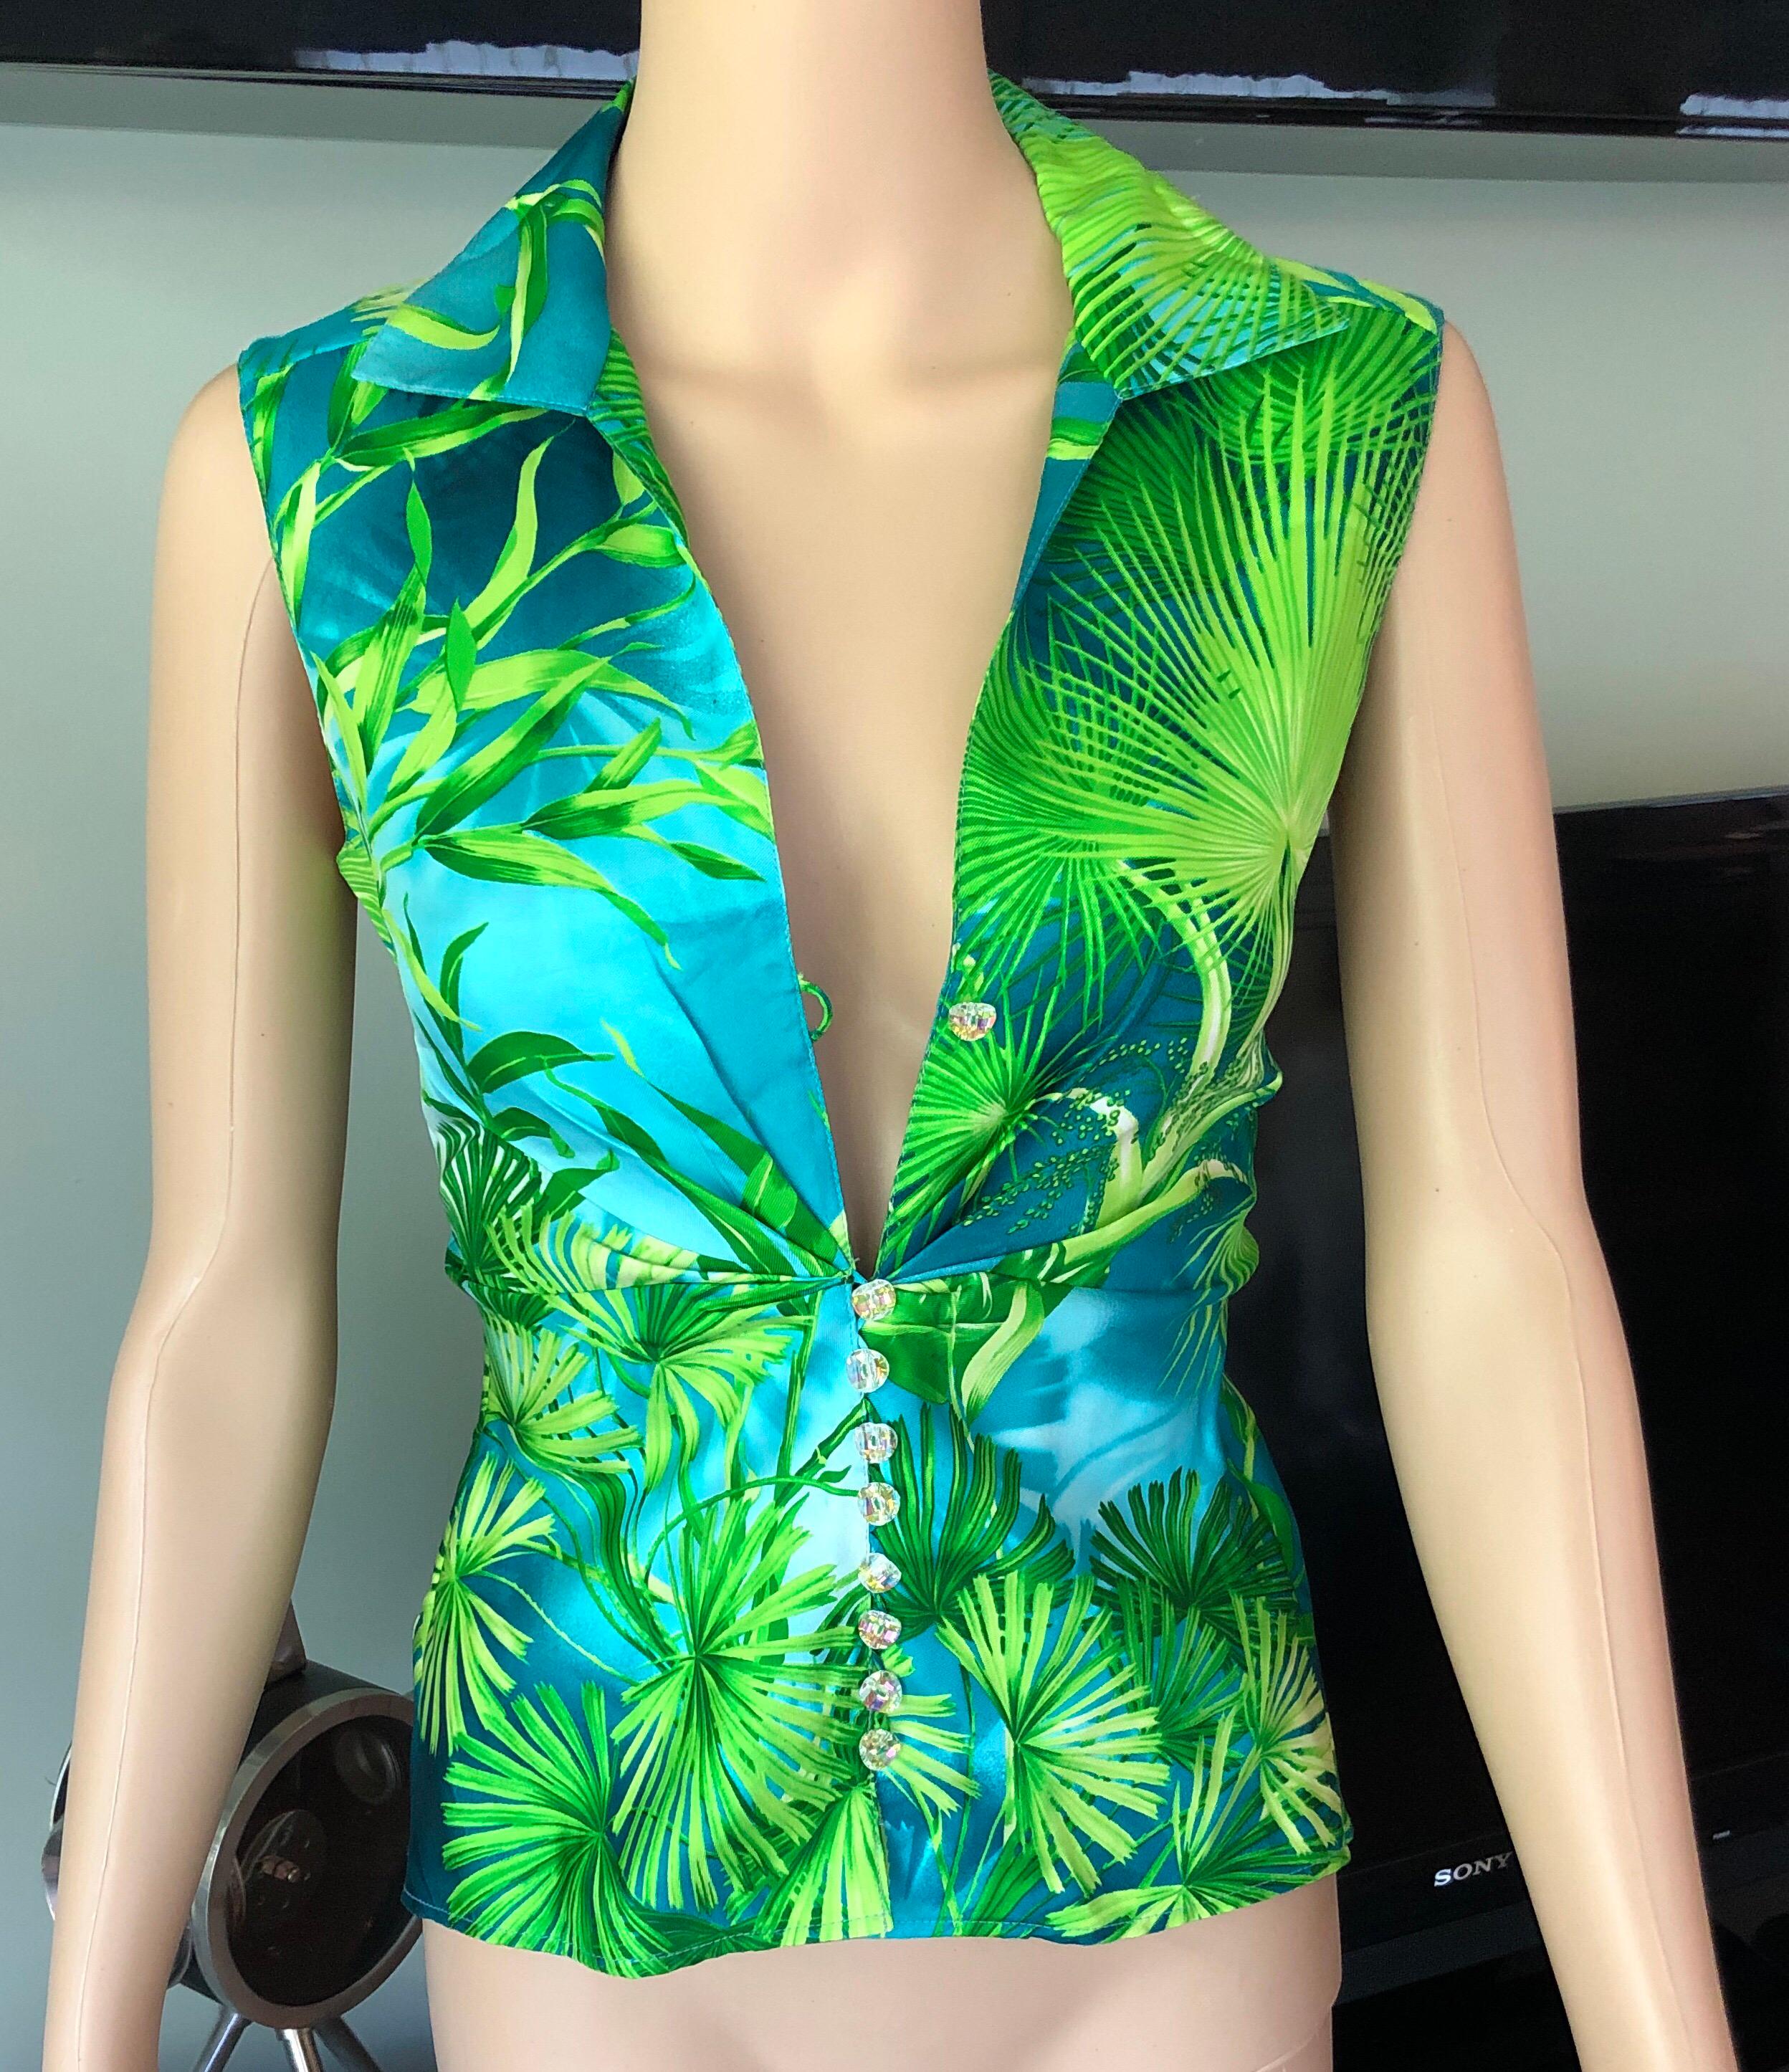 GIANNI VERSACE Runway S/S 2000 Sexy Plunging Decollete Silk Shirt Top Size 40

Gianni Versace sleeveless top with tropical print throughout, pointed collar and crystal button closures at front.

ICONIC PIECE!!! HIGHLY COLLECTIBLE!!!

About Versace: